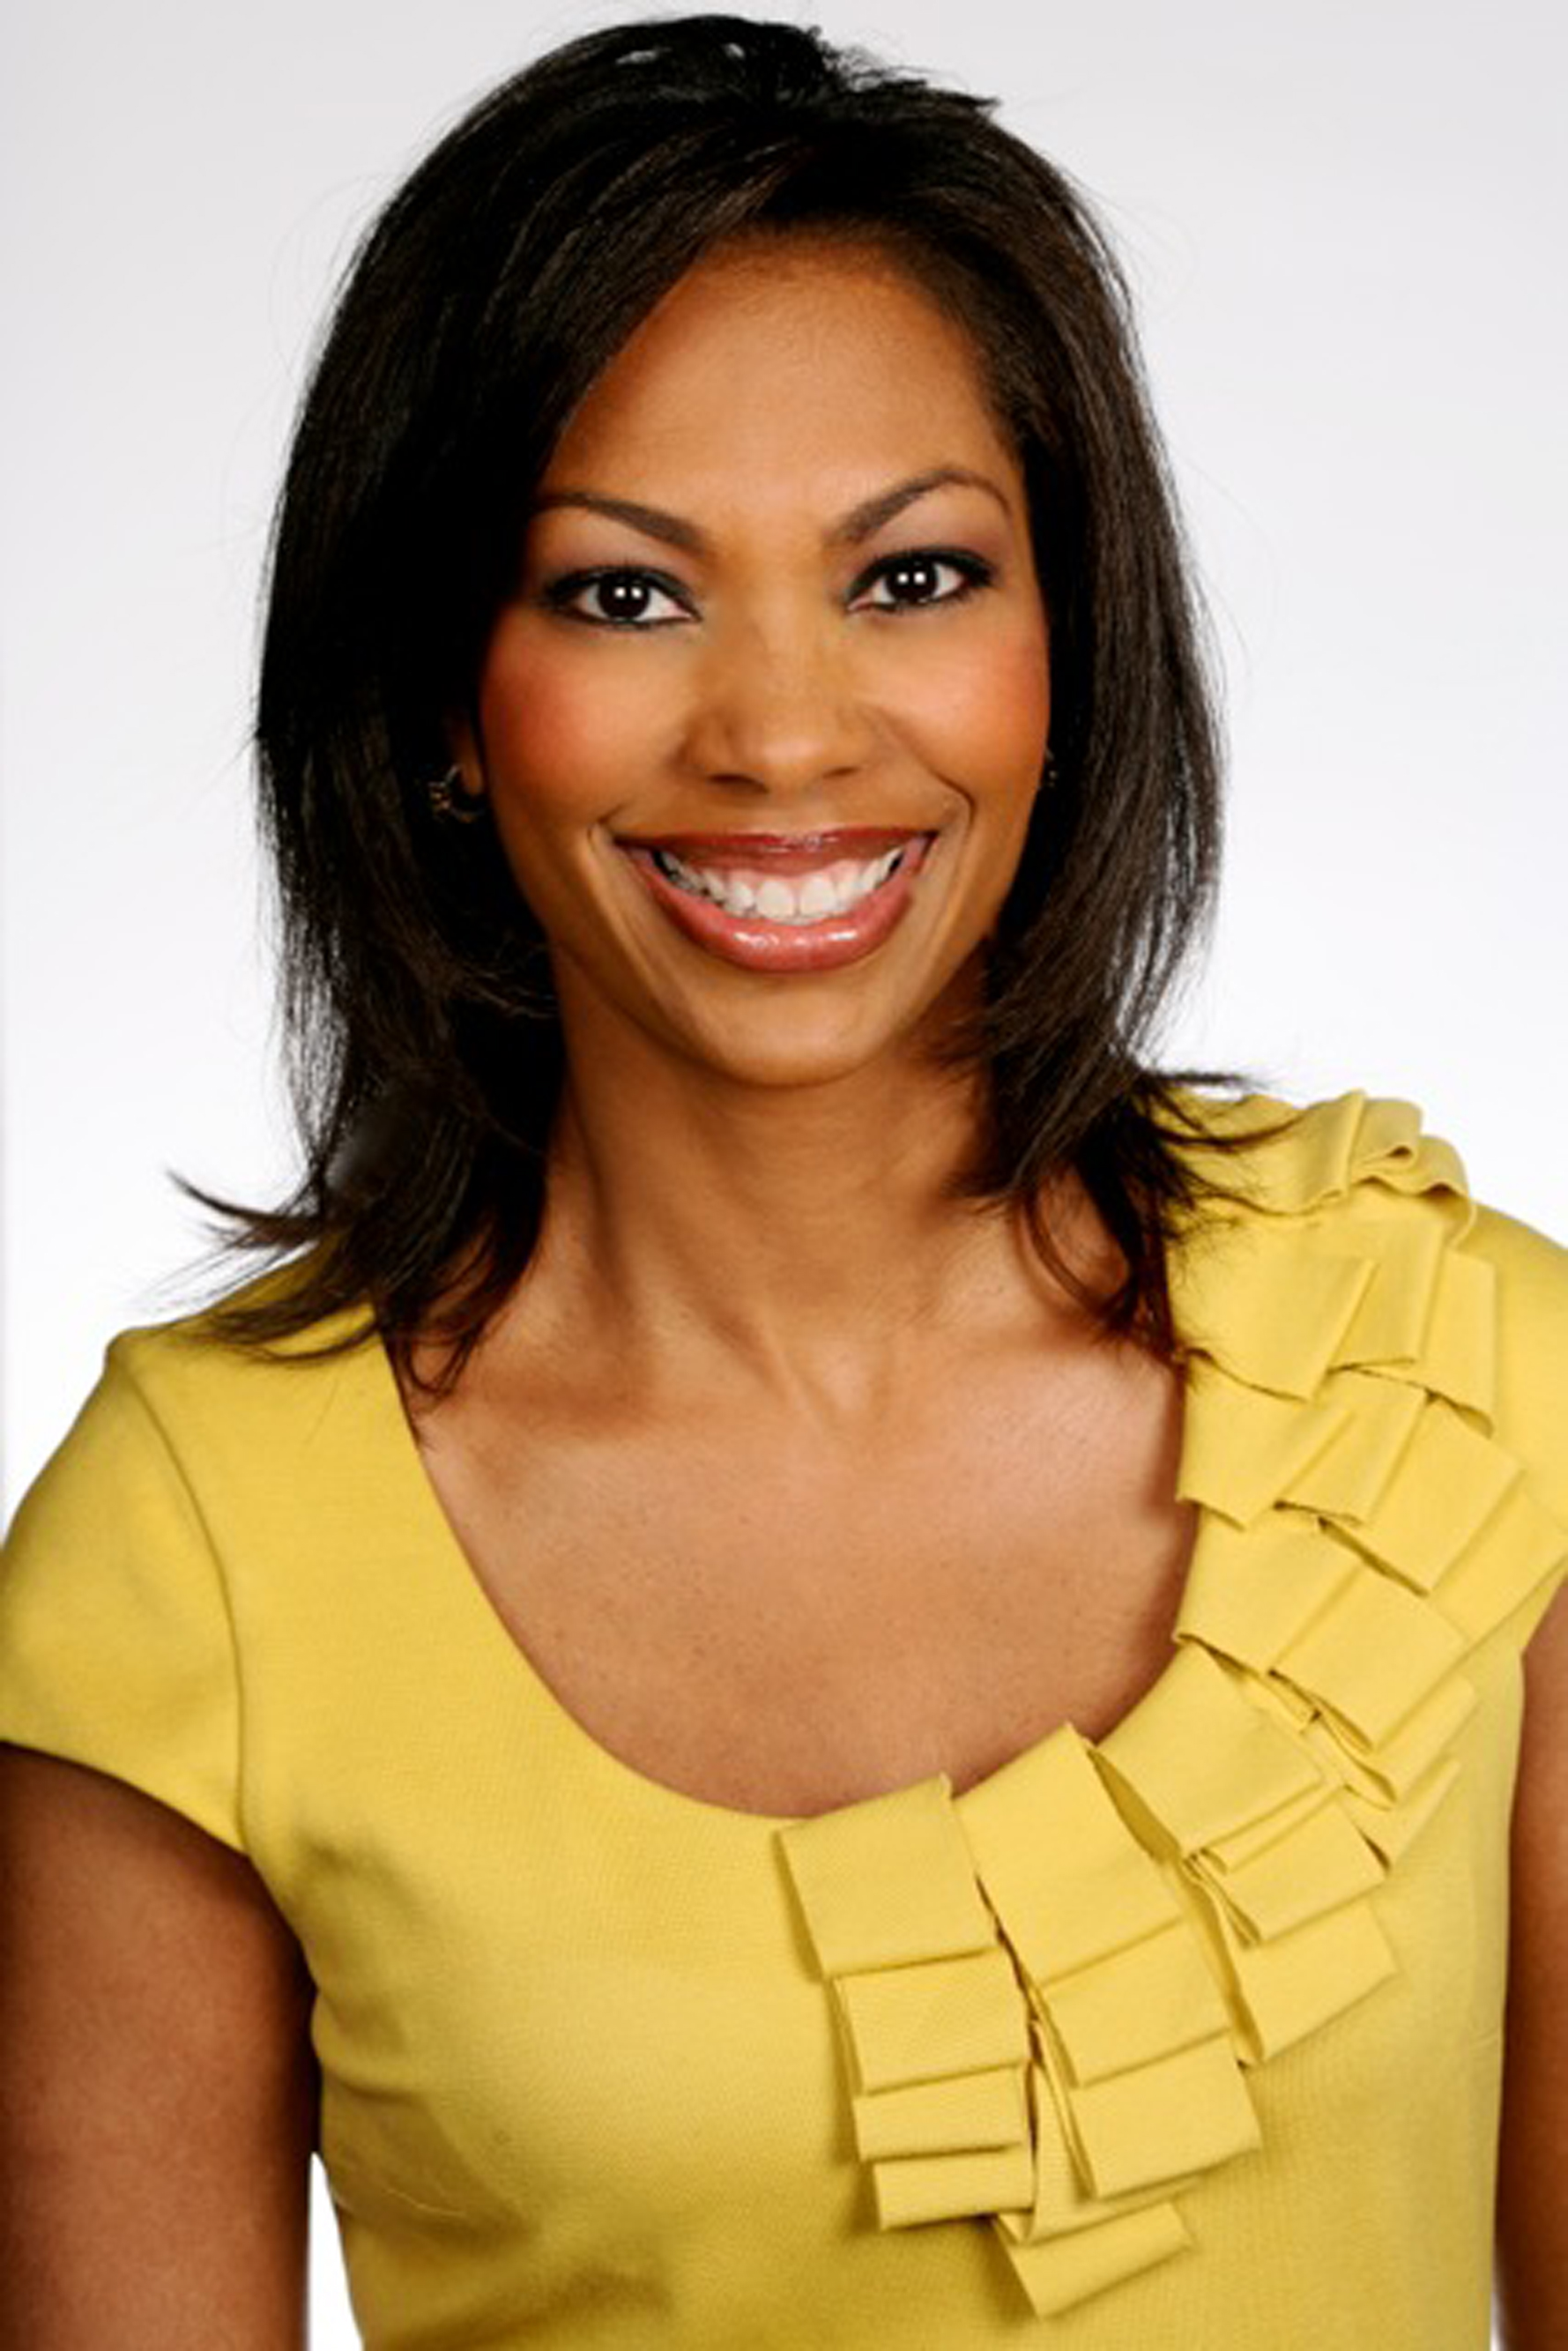 deonna martin recommends harris faulkner naked pic